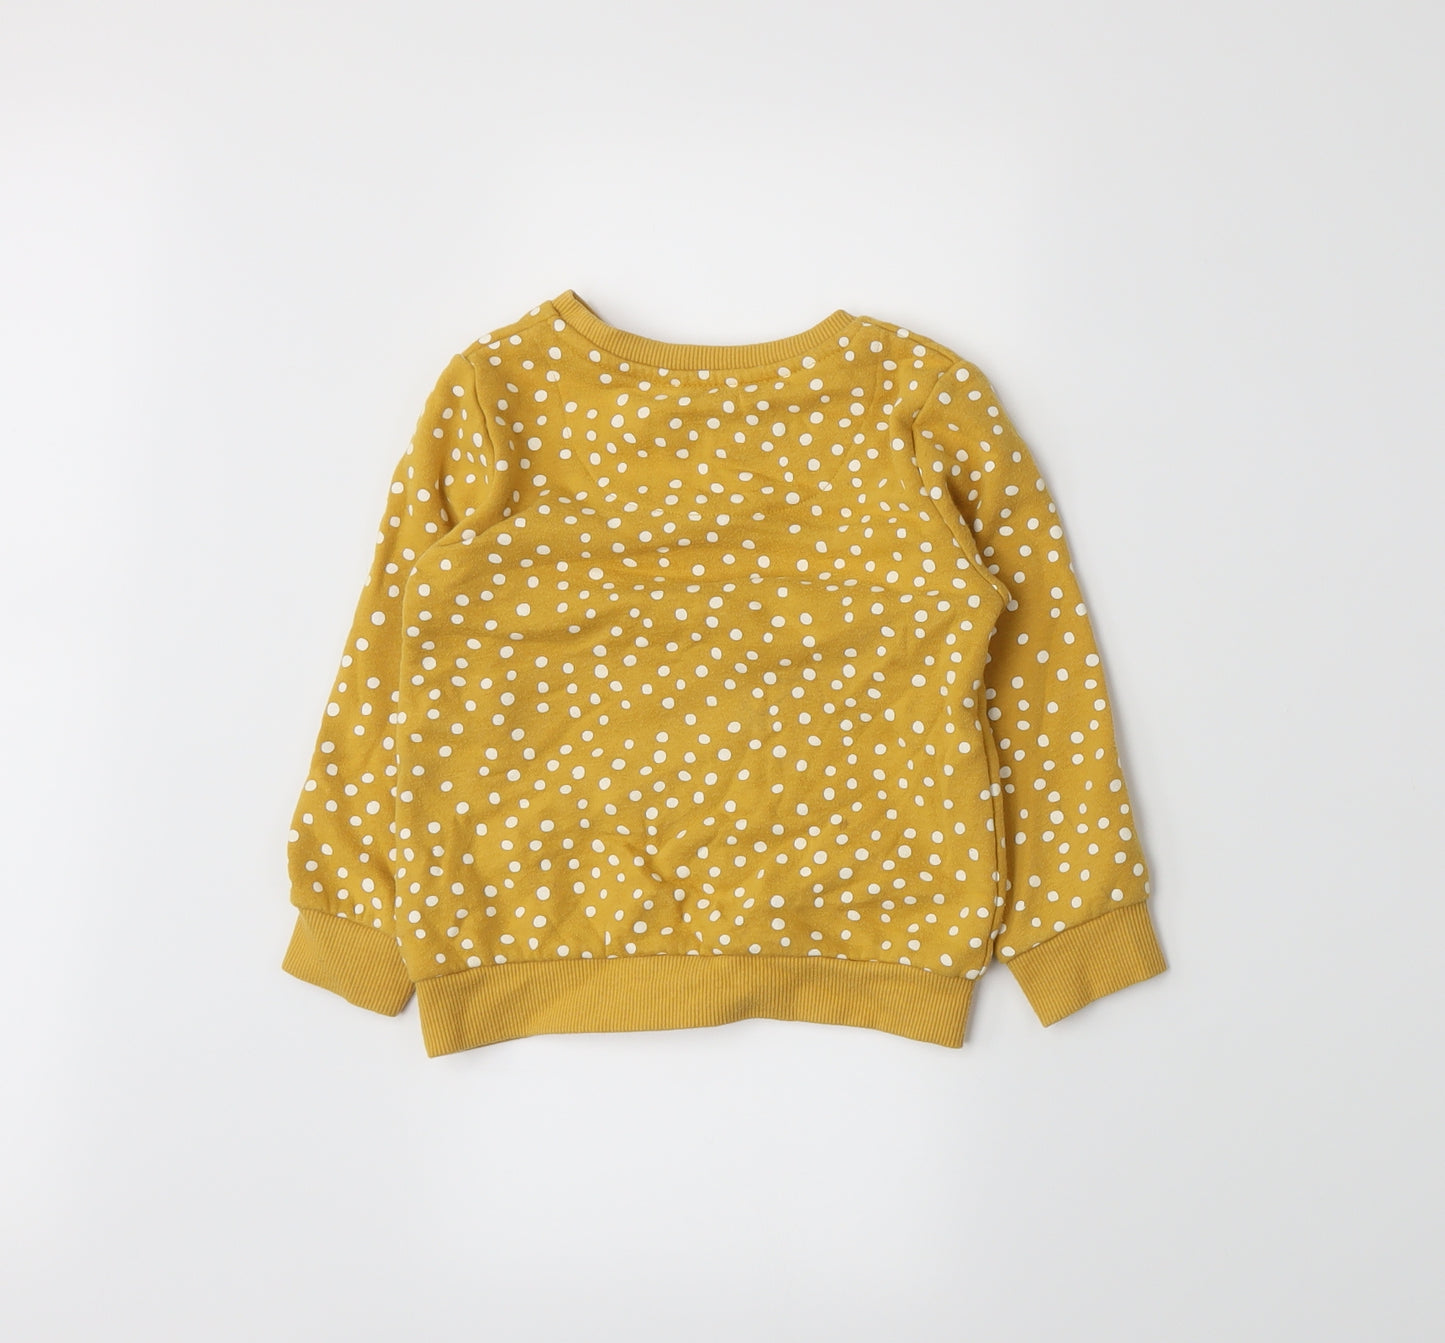 F&F Girls Yellow Spotted Jersey Pullover Sweatshirt Size 2-3 Years